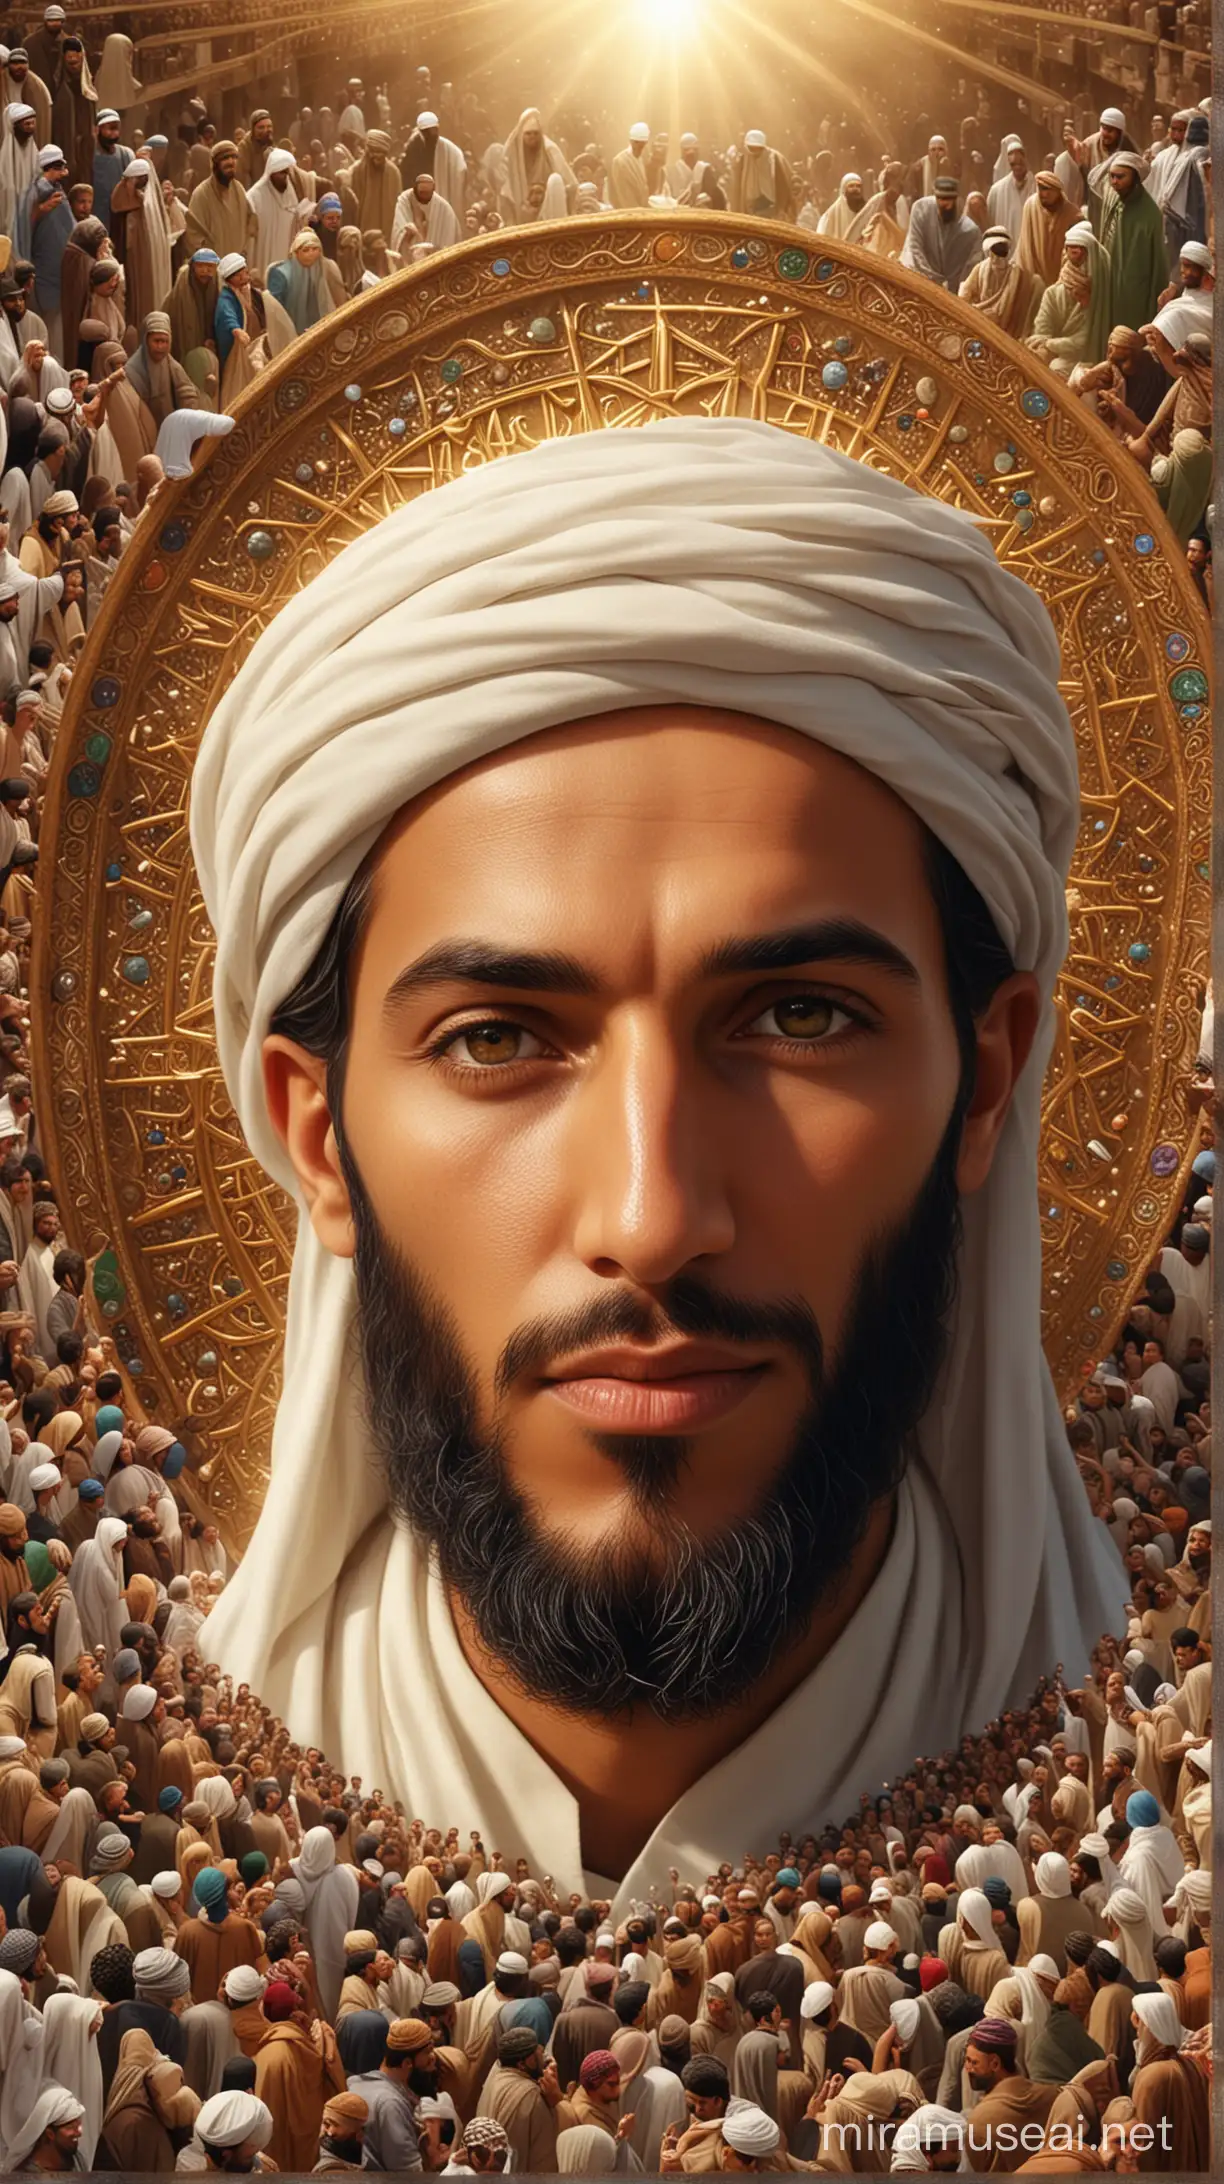 A depiction of the Prophet Muhammad, his face radiant with compassion, surrounded by a diverse group of followers, symbolizing the universal message of peace and unity in Islam, 4K HD with islamic tradition